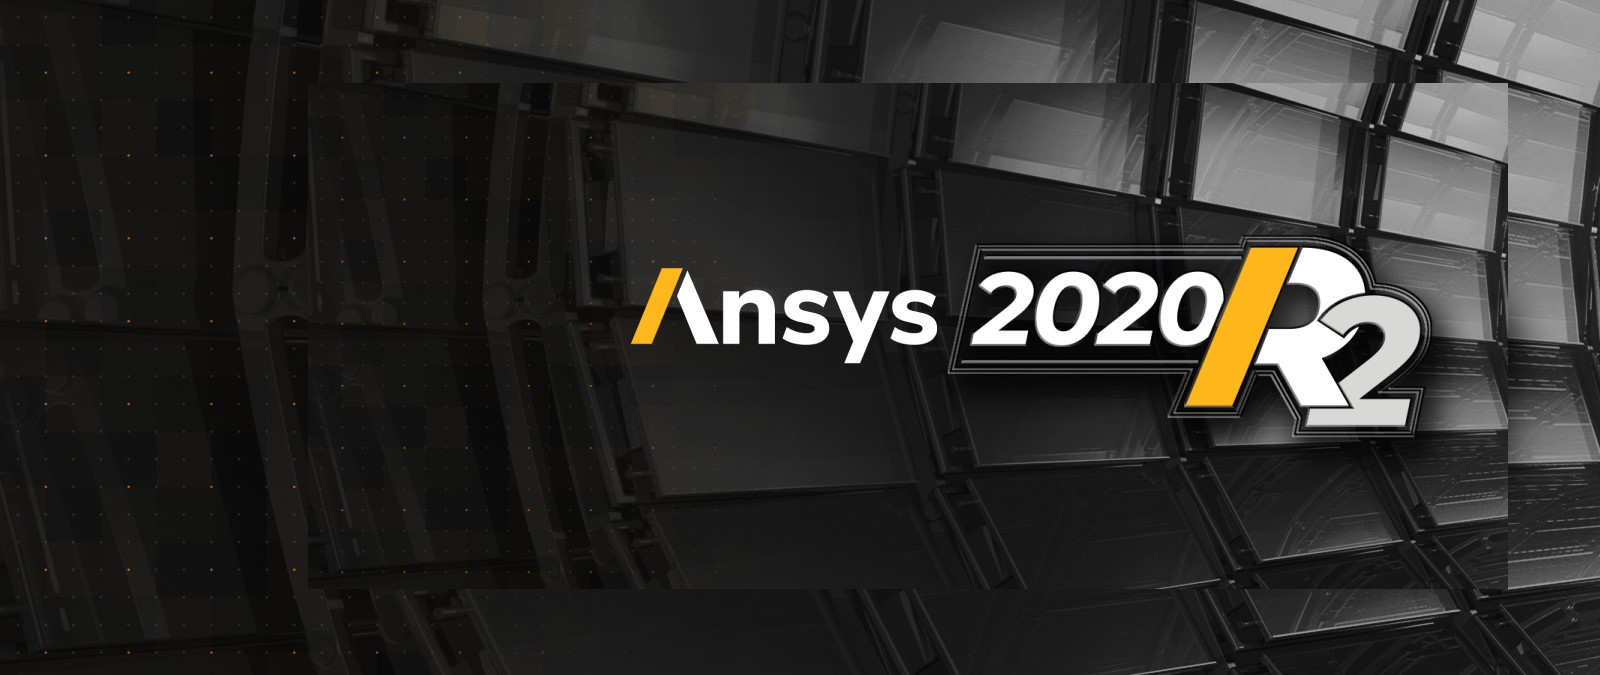 ANSYS 2020 R2 Release